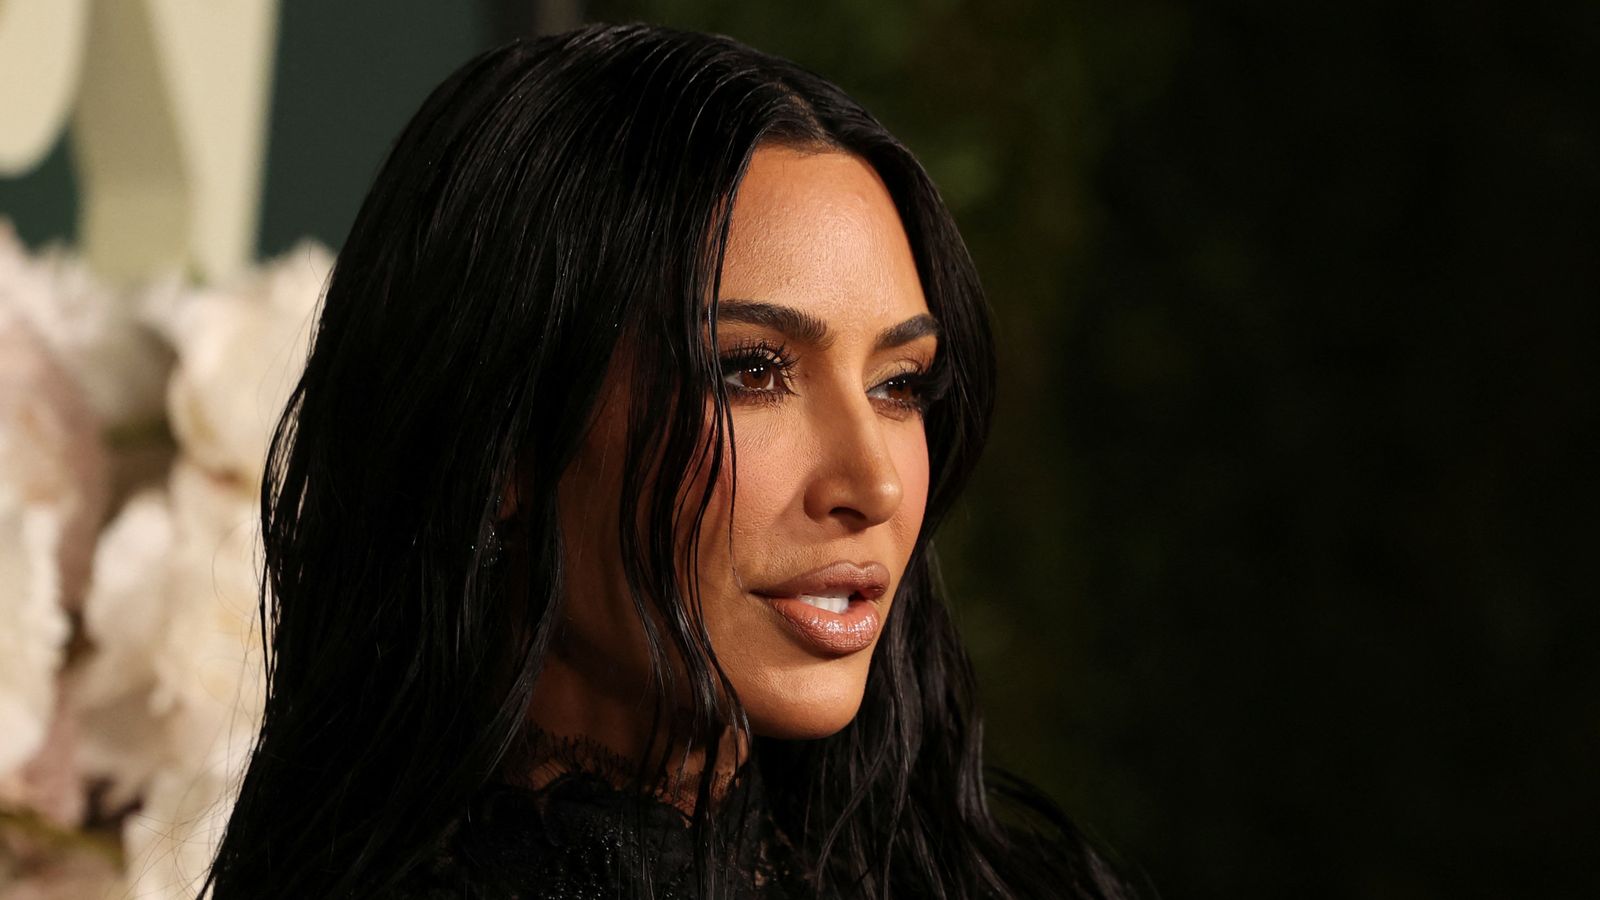 'Open' divorce of Kim Kardashian's parents helped reality star cope with split from Kanye West